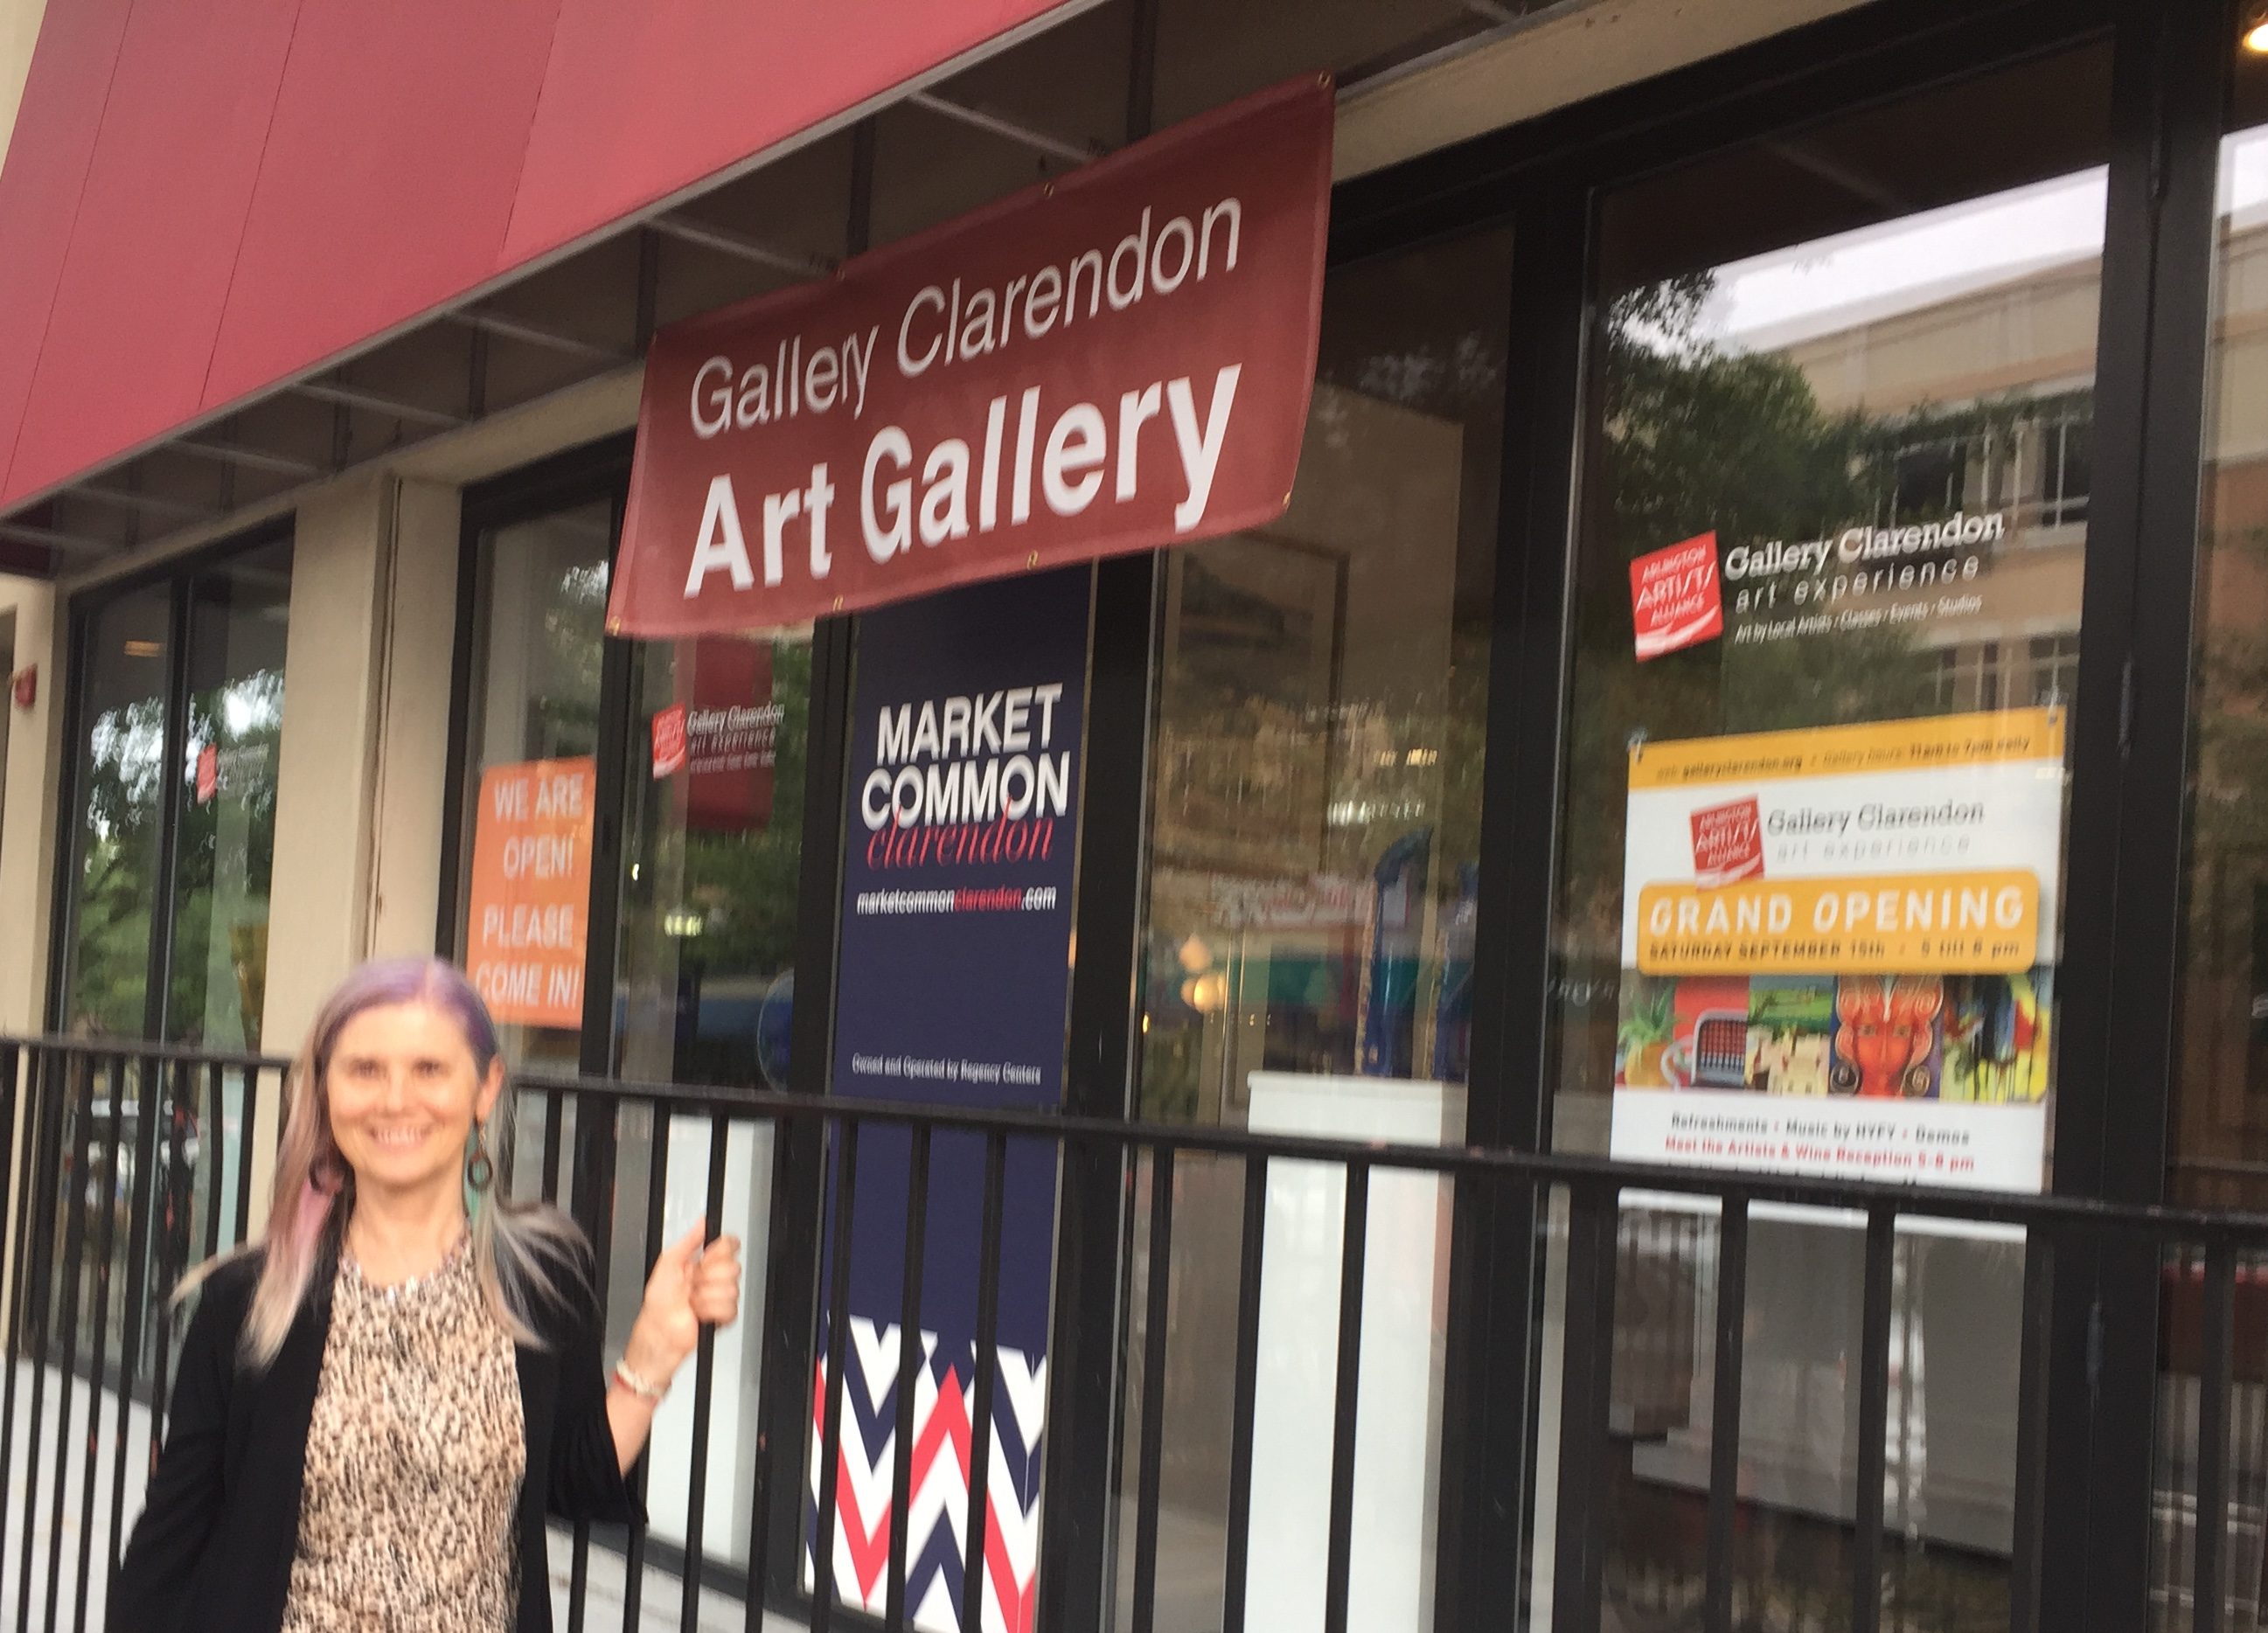 Grand opening of Gallery Clarendon, September 2018